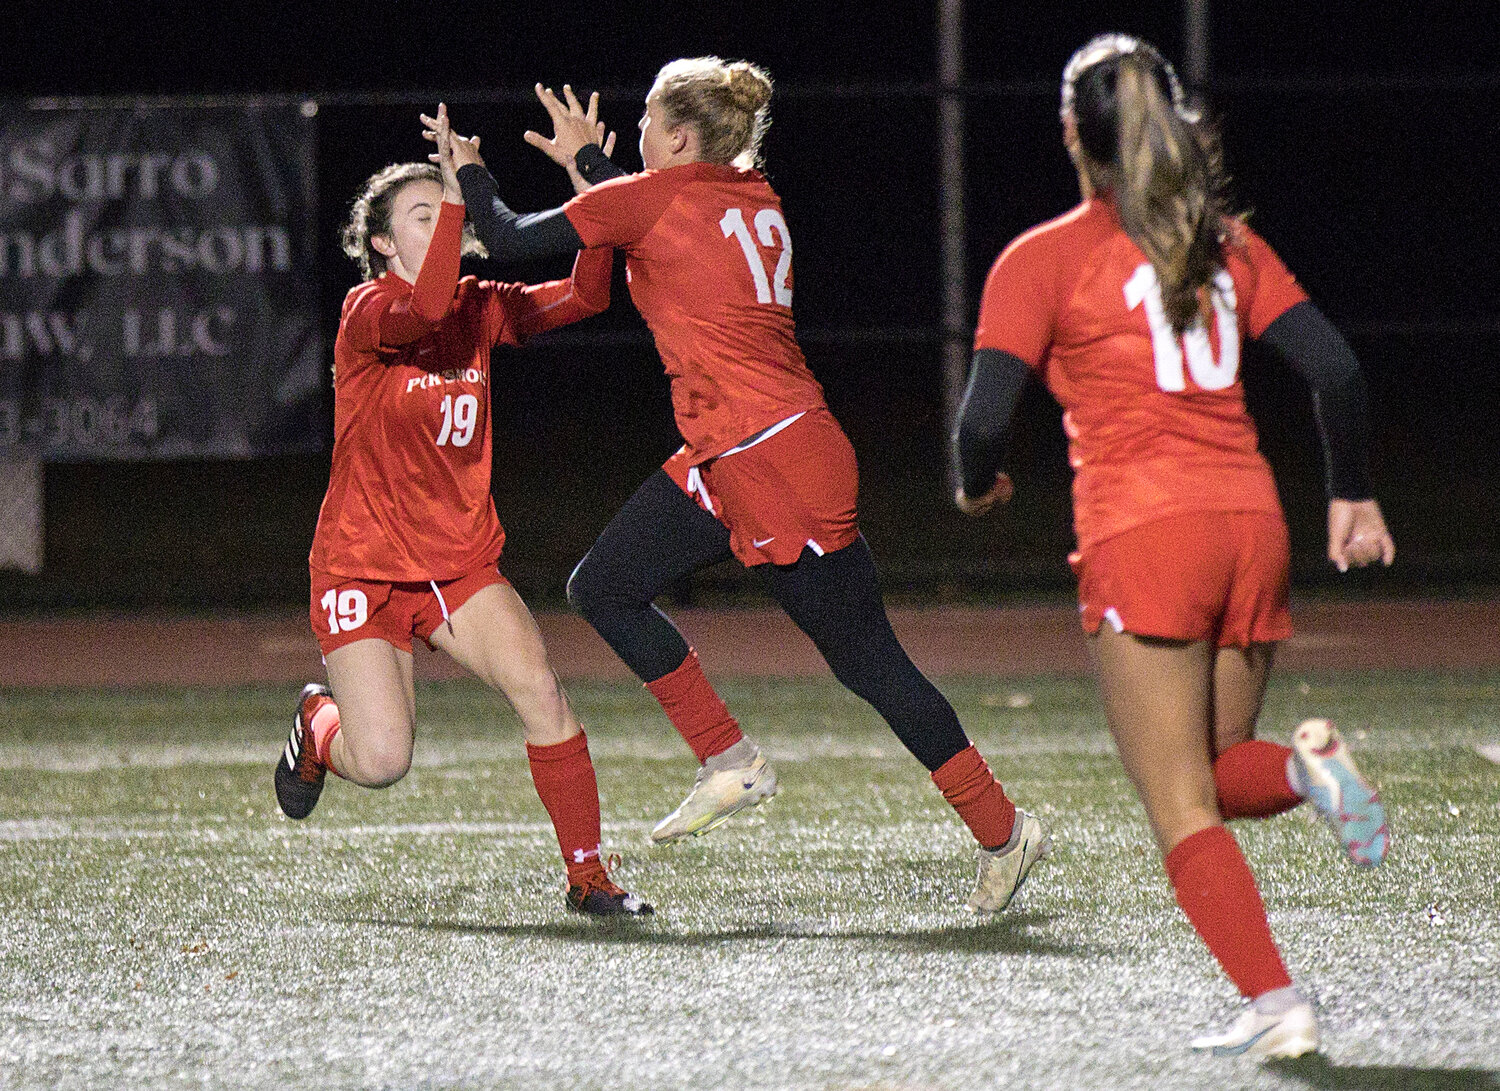 Claire Hook and Mollyana McGuire celebrate a goal in the first half of Wednesday's semifinal match against Lincoln.